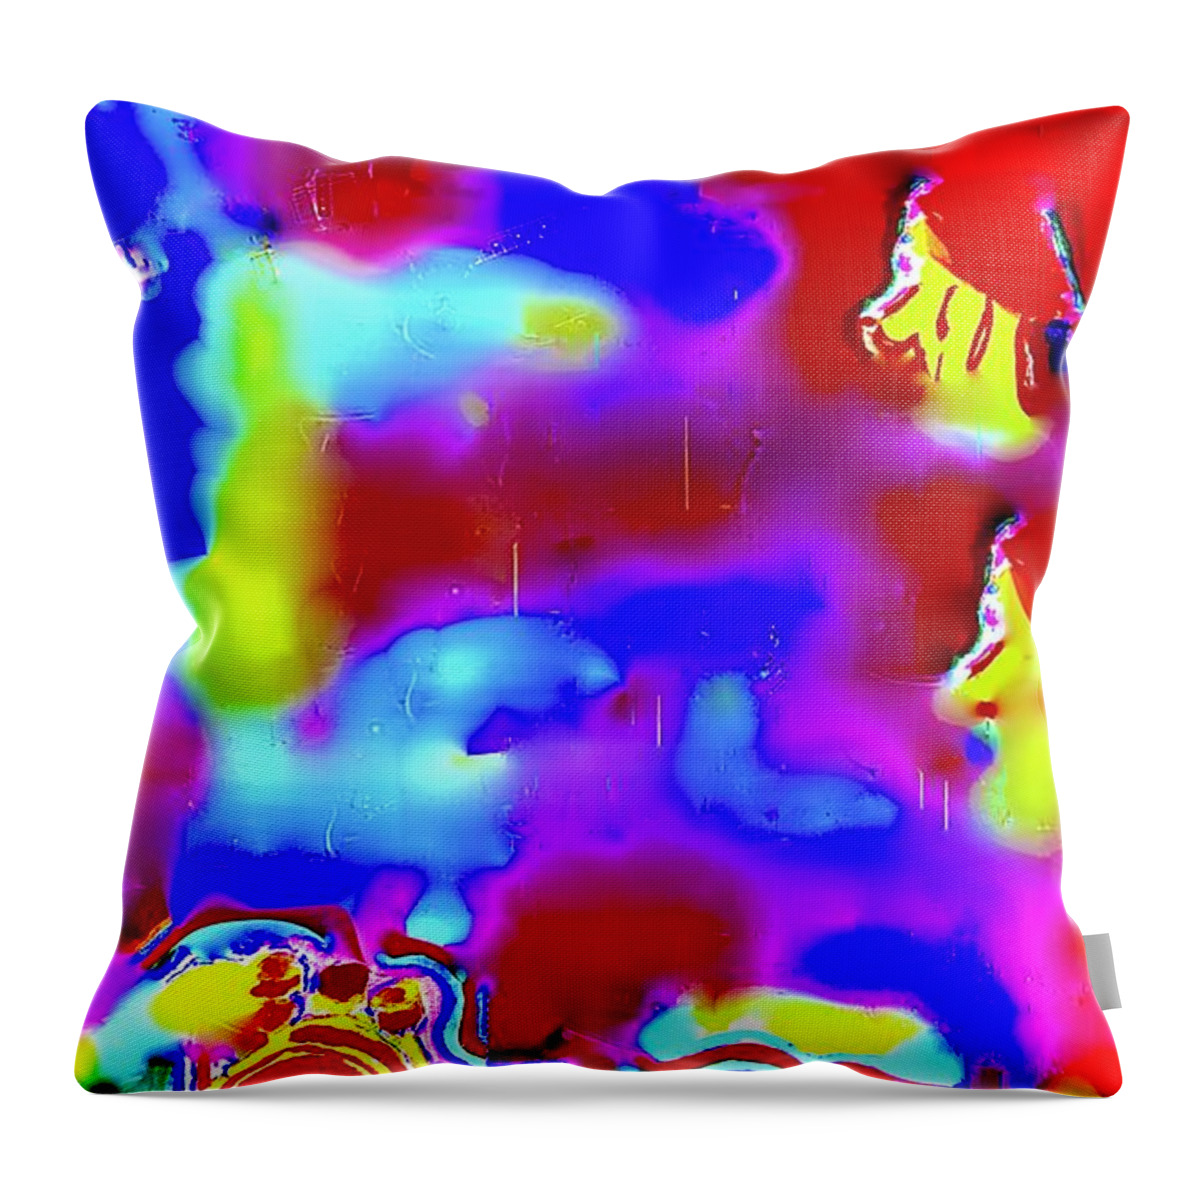 Many Redheads Among Us Throw Pillow featuring the mixed media Many Red Heads Amongst Us by Bencasso Barnesquiat